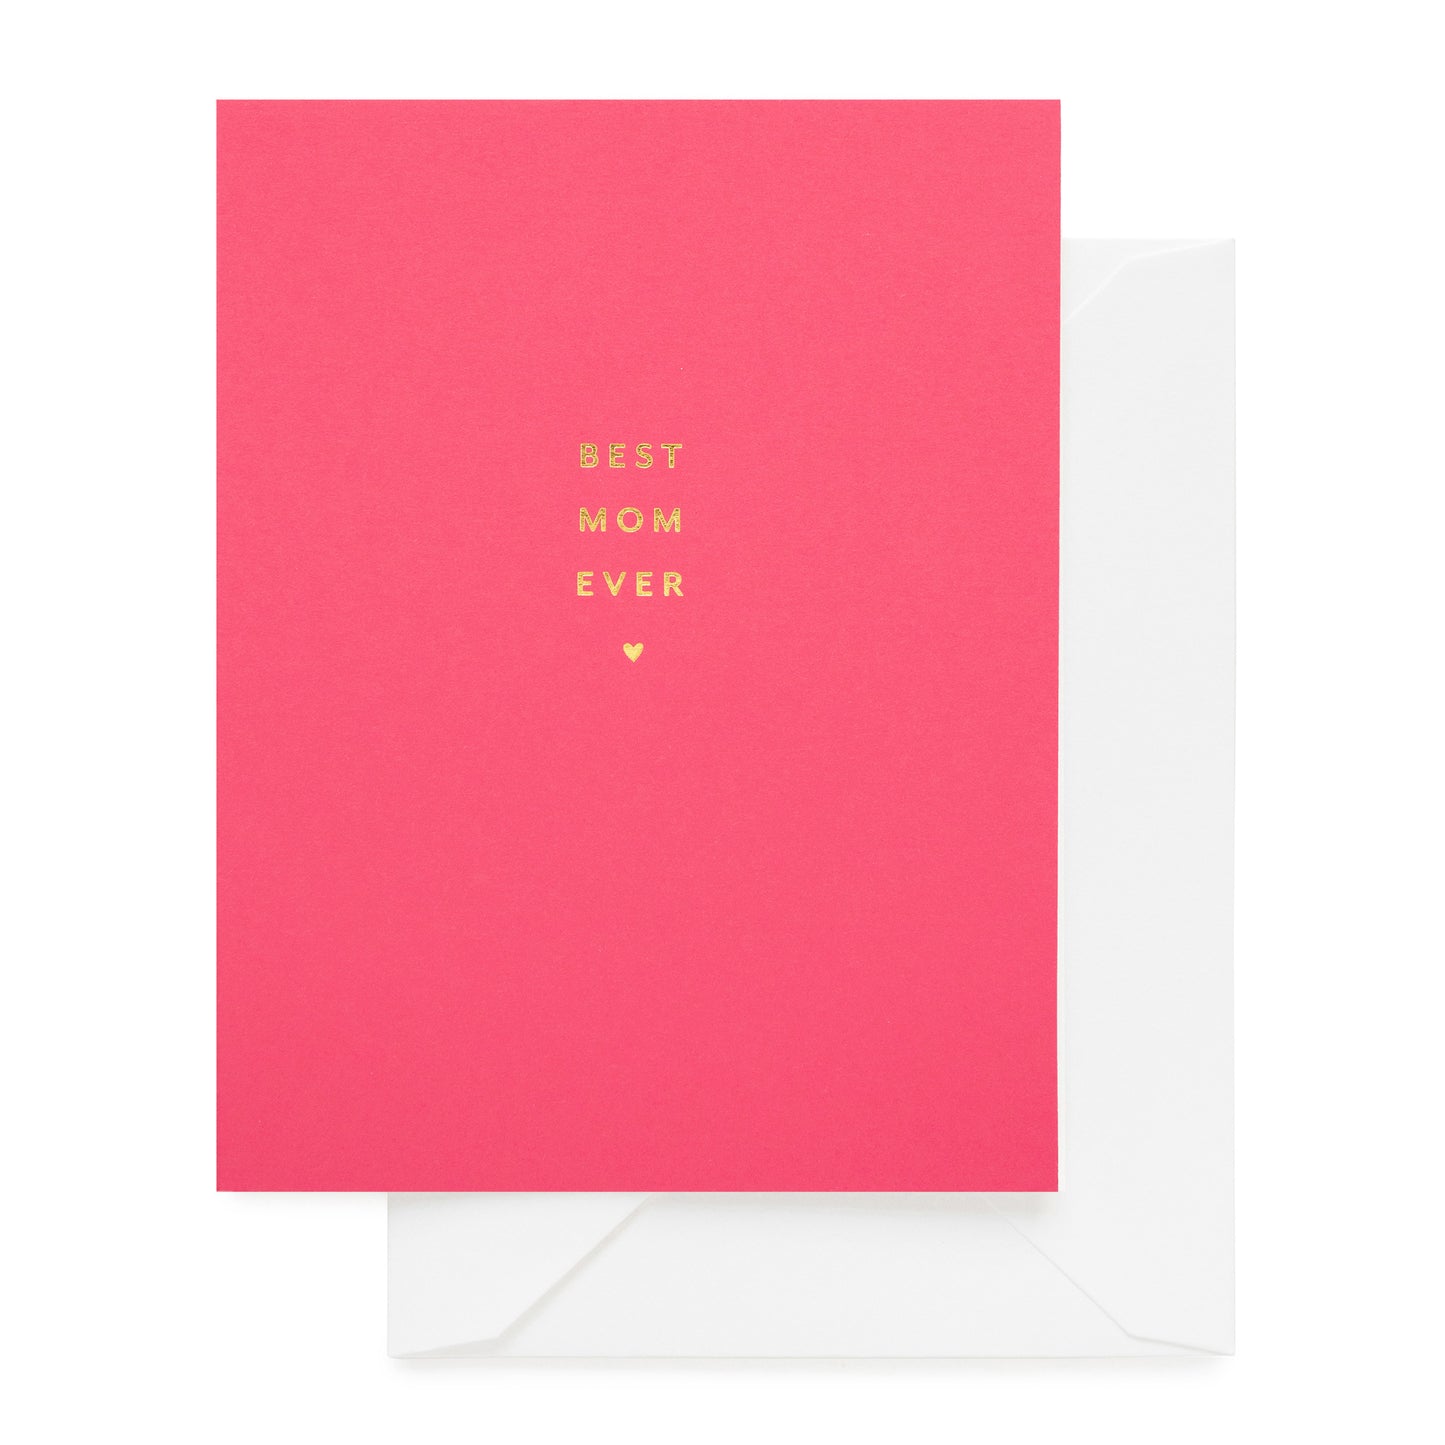 hot pink paper with gold text, white envelope